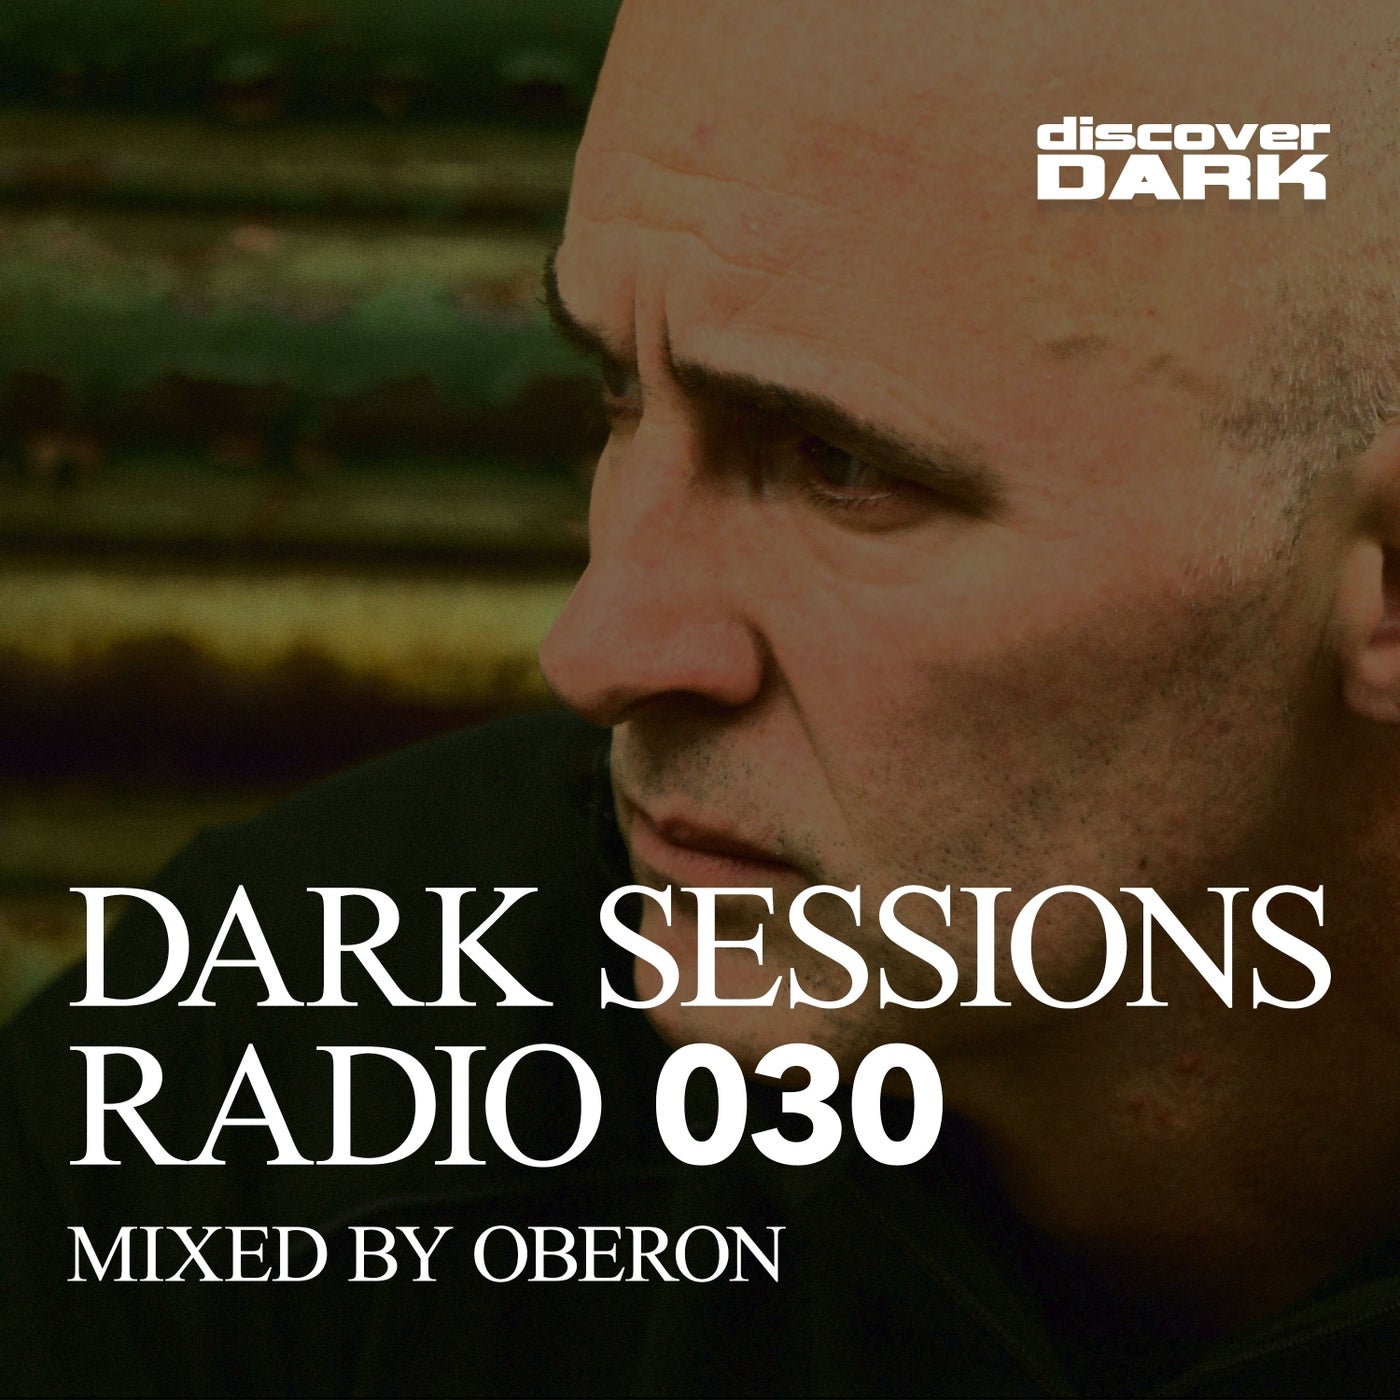 Dark Sessions Radio 030 (Mixed by Oberon)